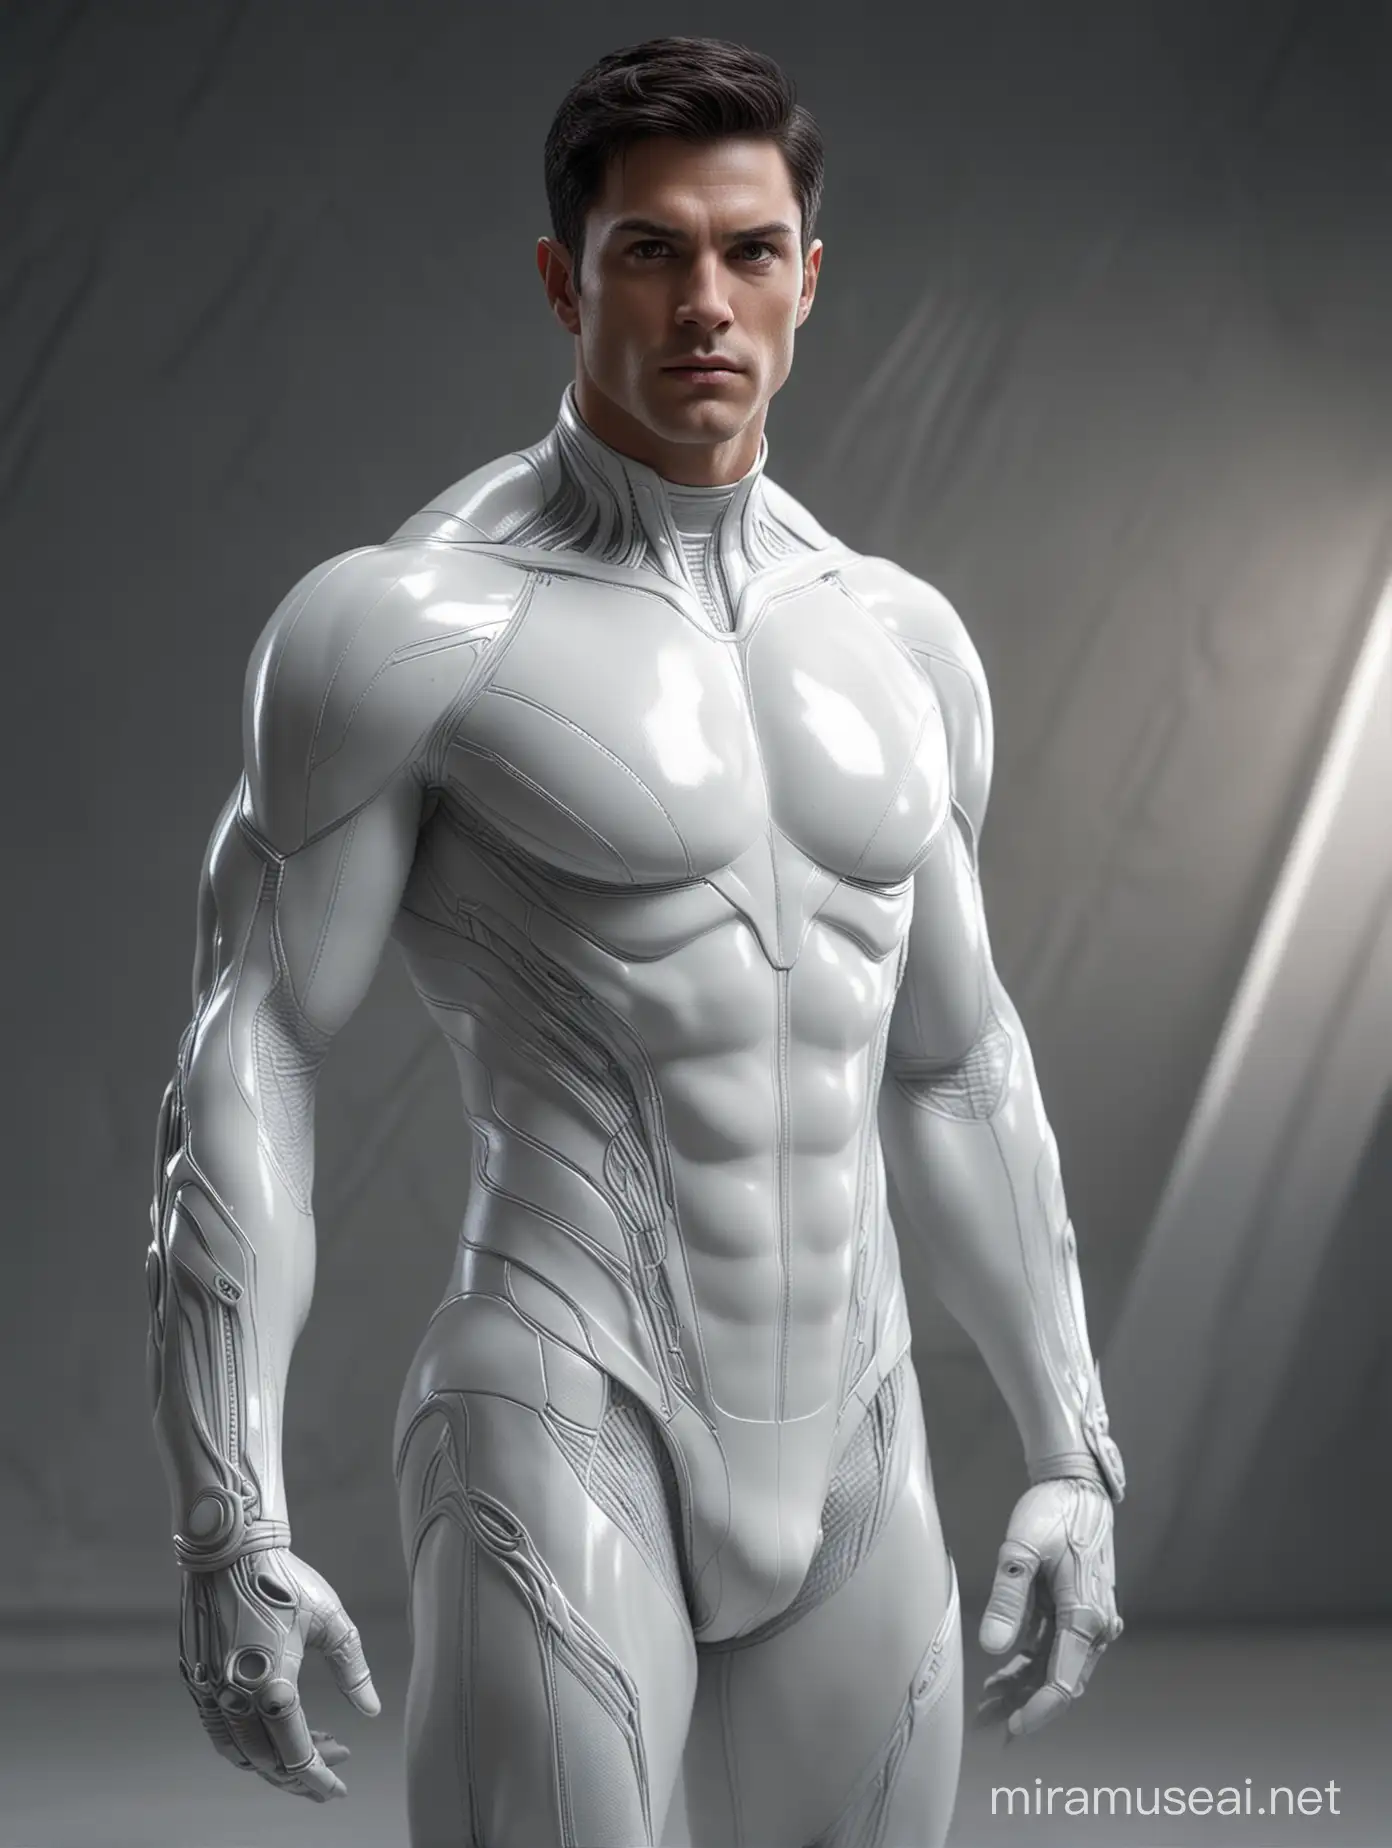 Handsome Kryptonian Man in Futuristic Bodysuit on Intricate Background